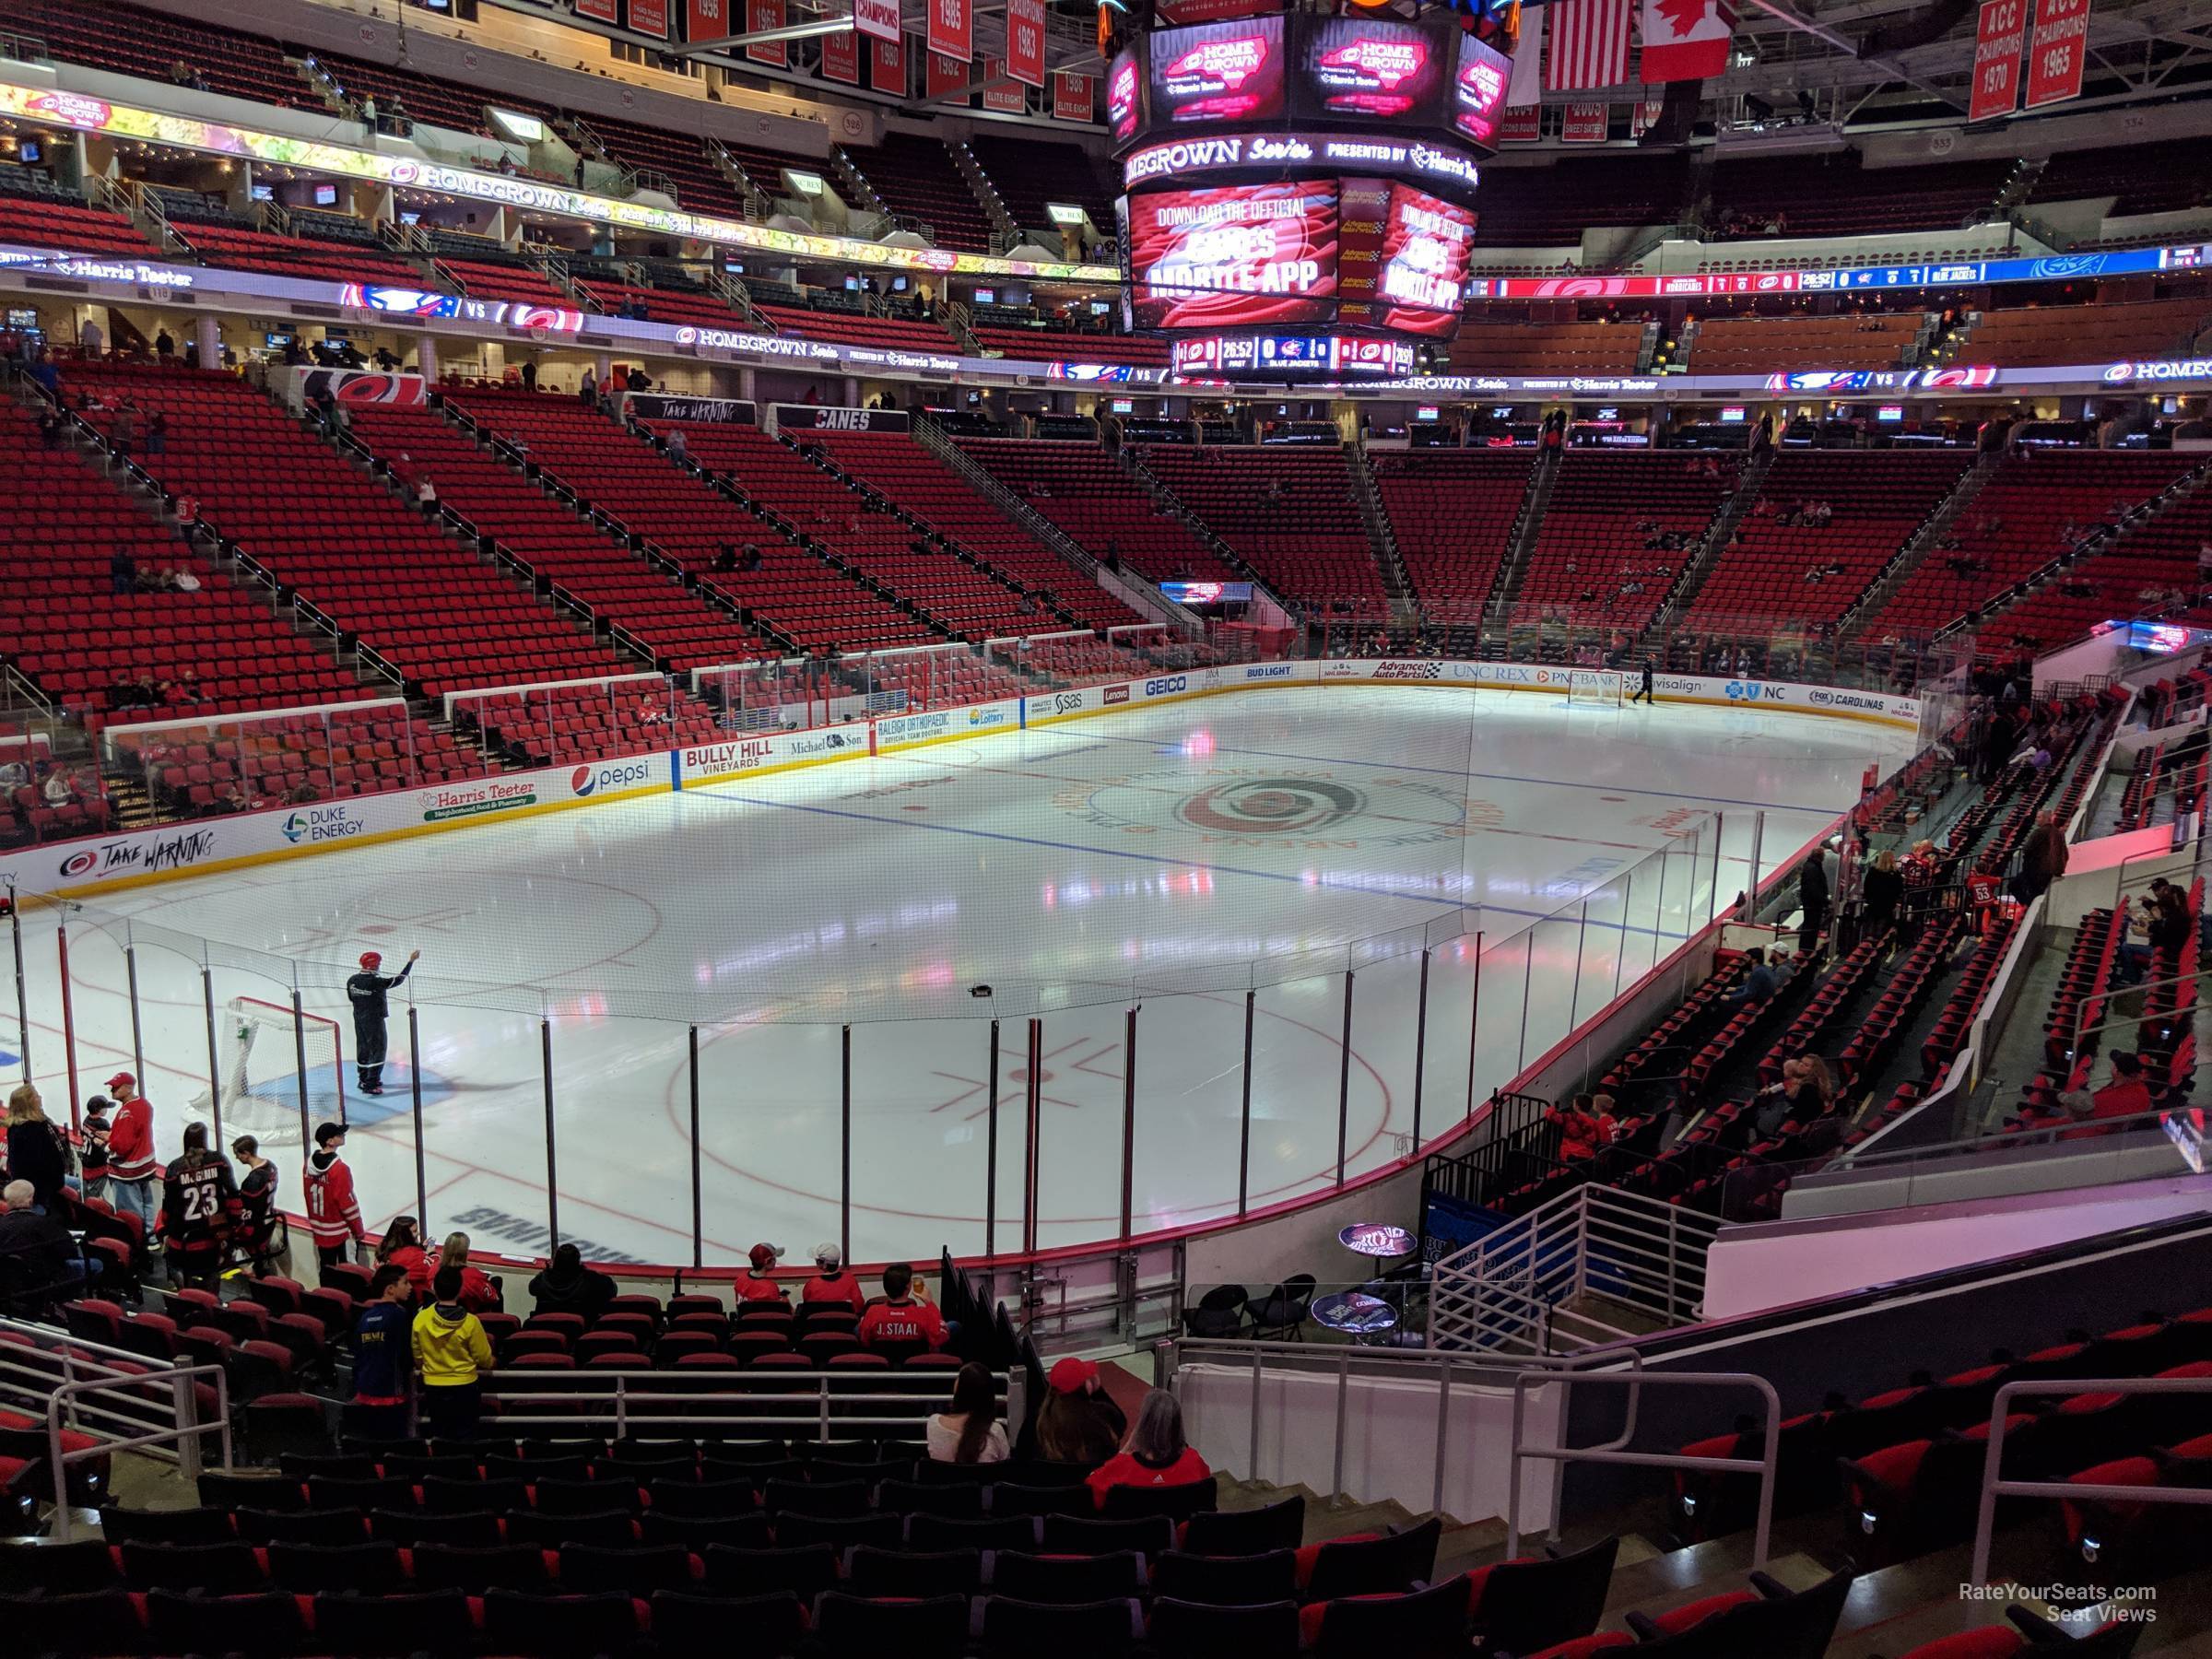 Section 109 at PNC Arena